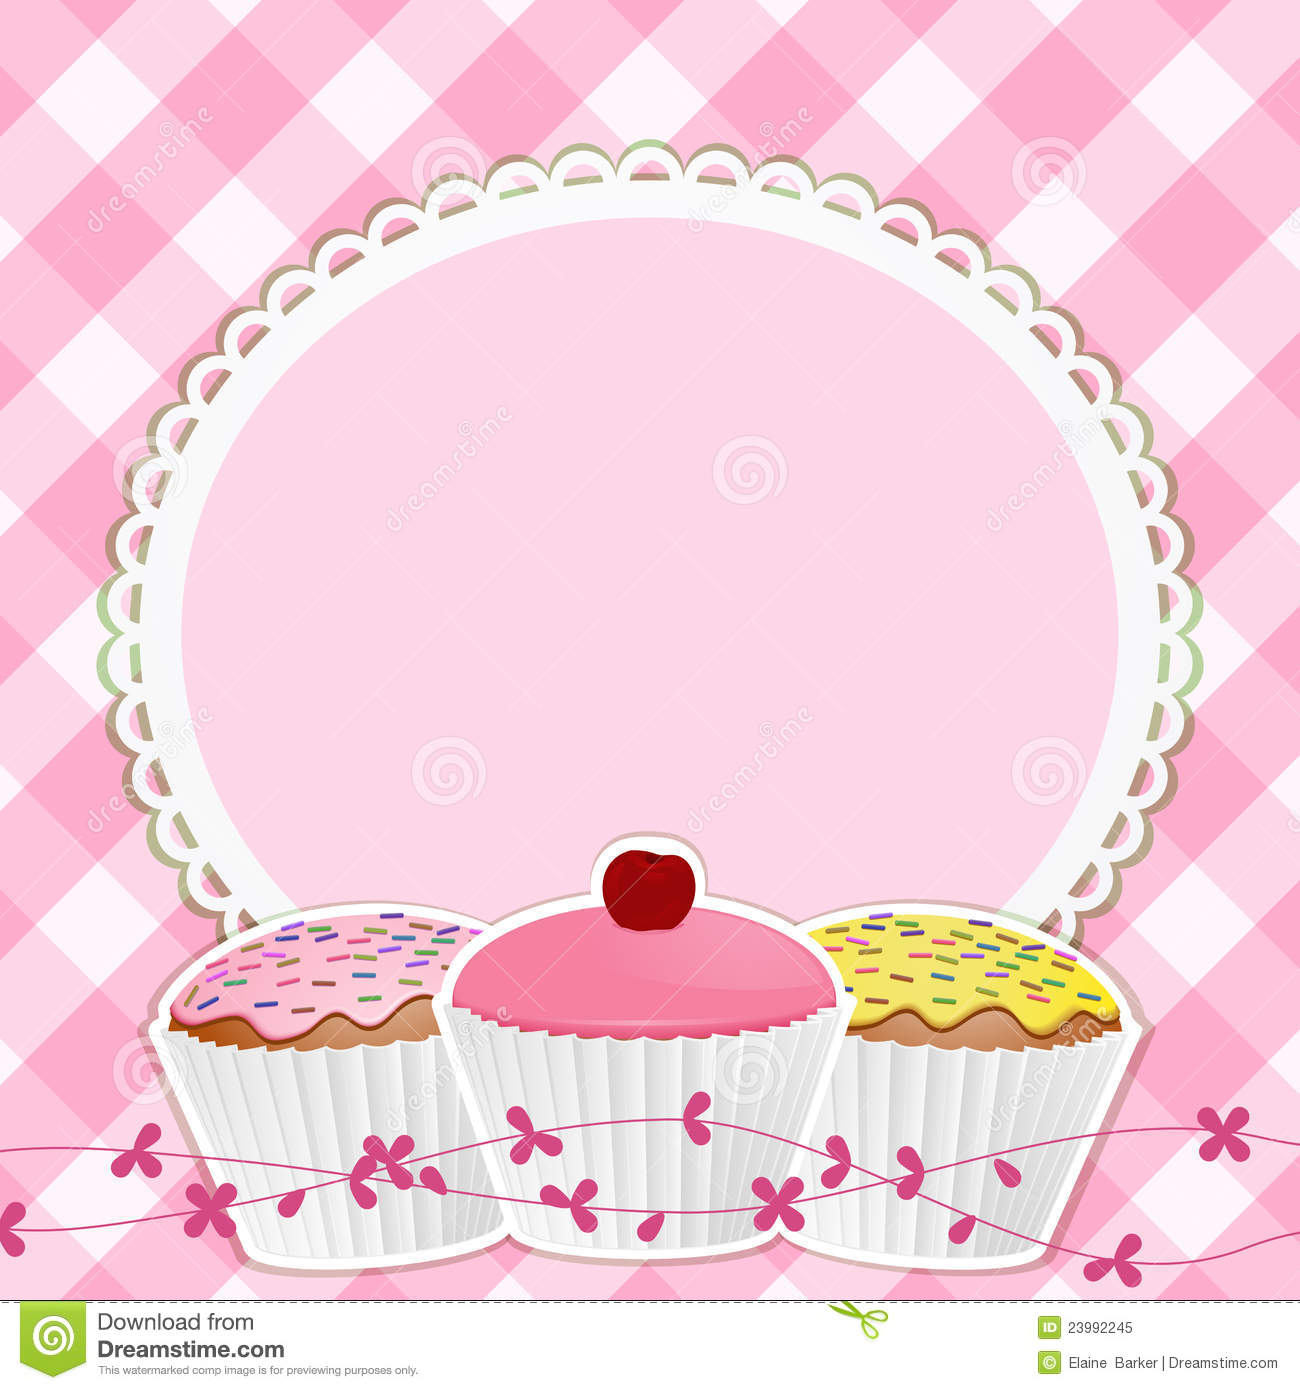 Cupcakes And Border On Pink Gingham Royalty Free Stock Photo   Image